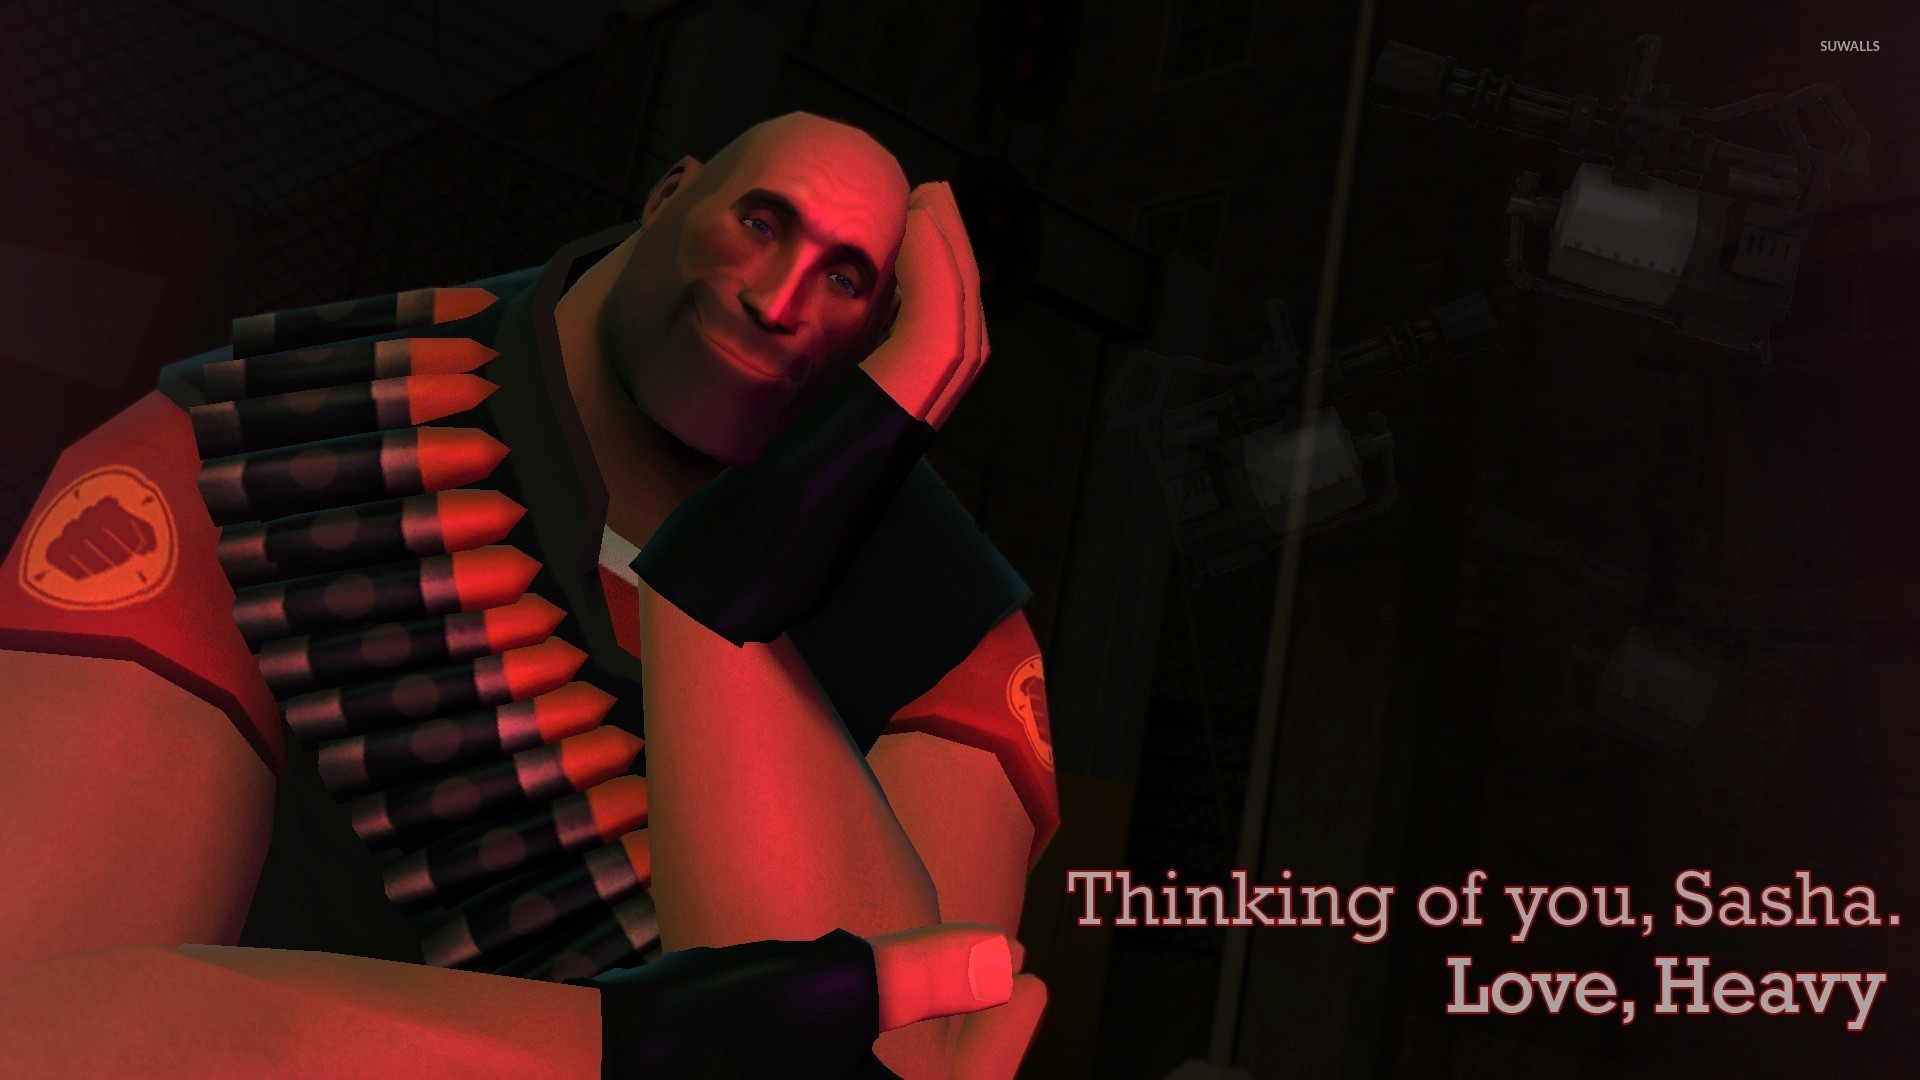 1920x1080 PreviousNext. Previous Image Next Image. tf2 team fortress 2 medic heavy scout  wallpaper 2719